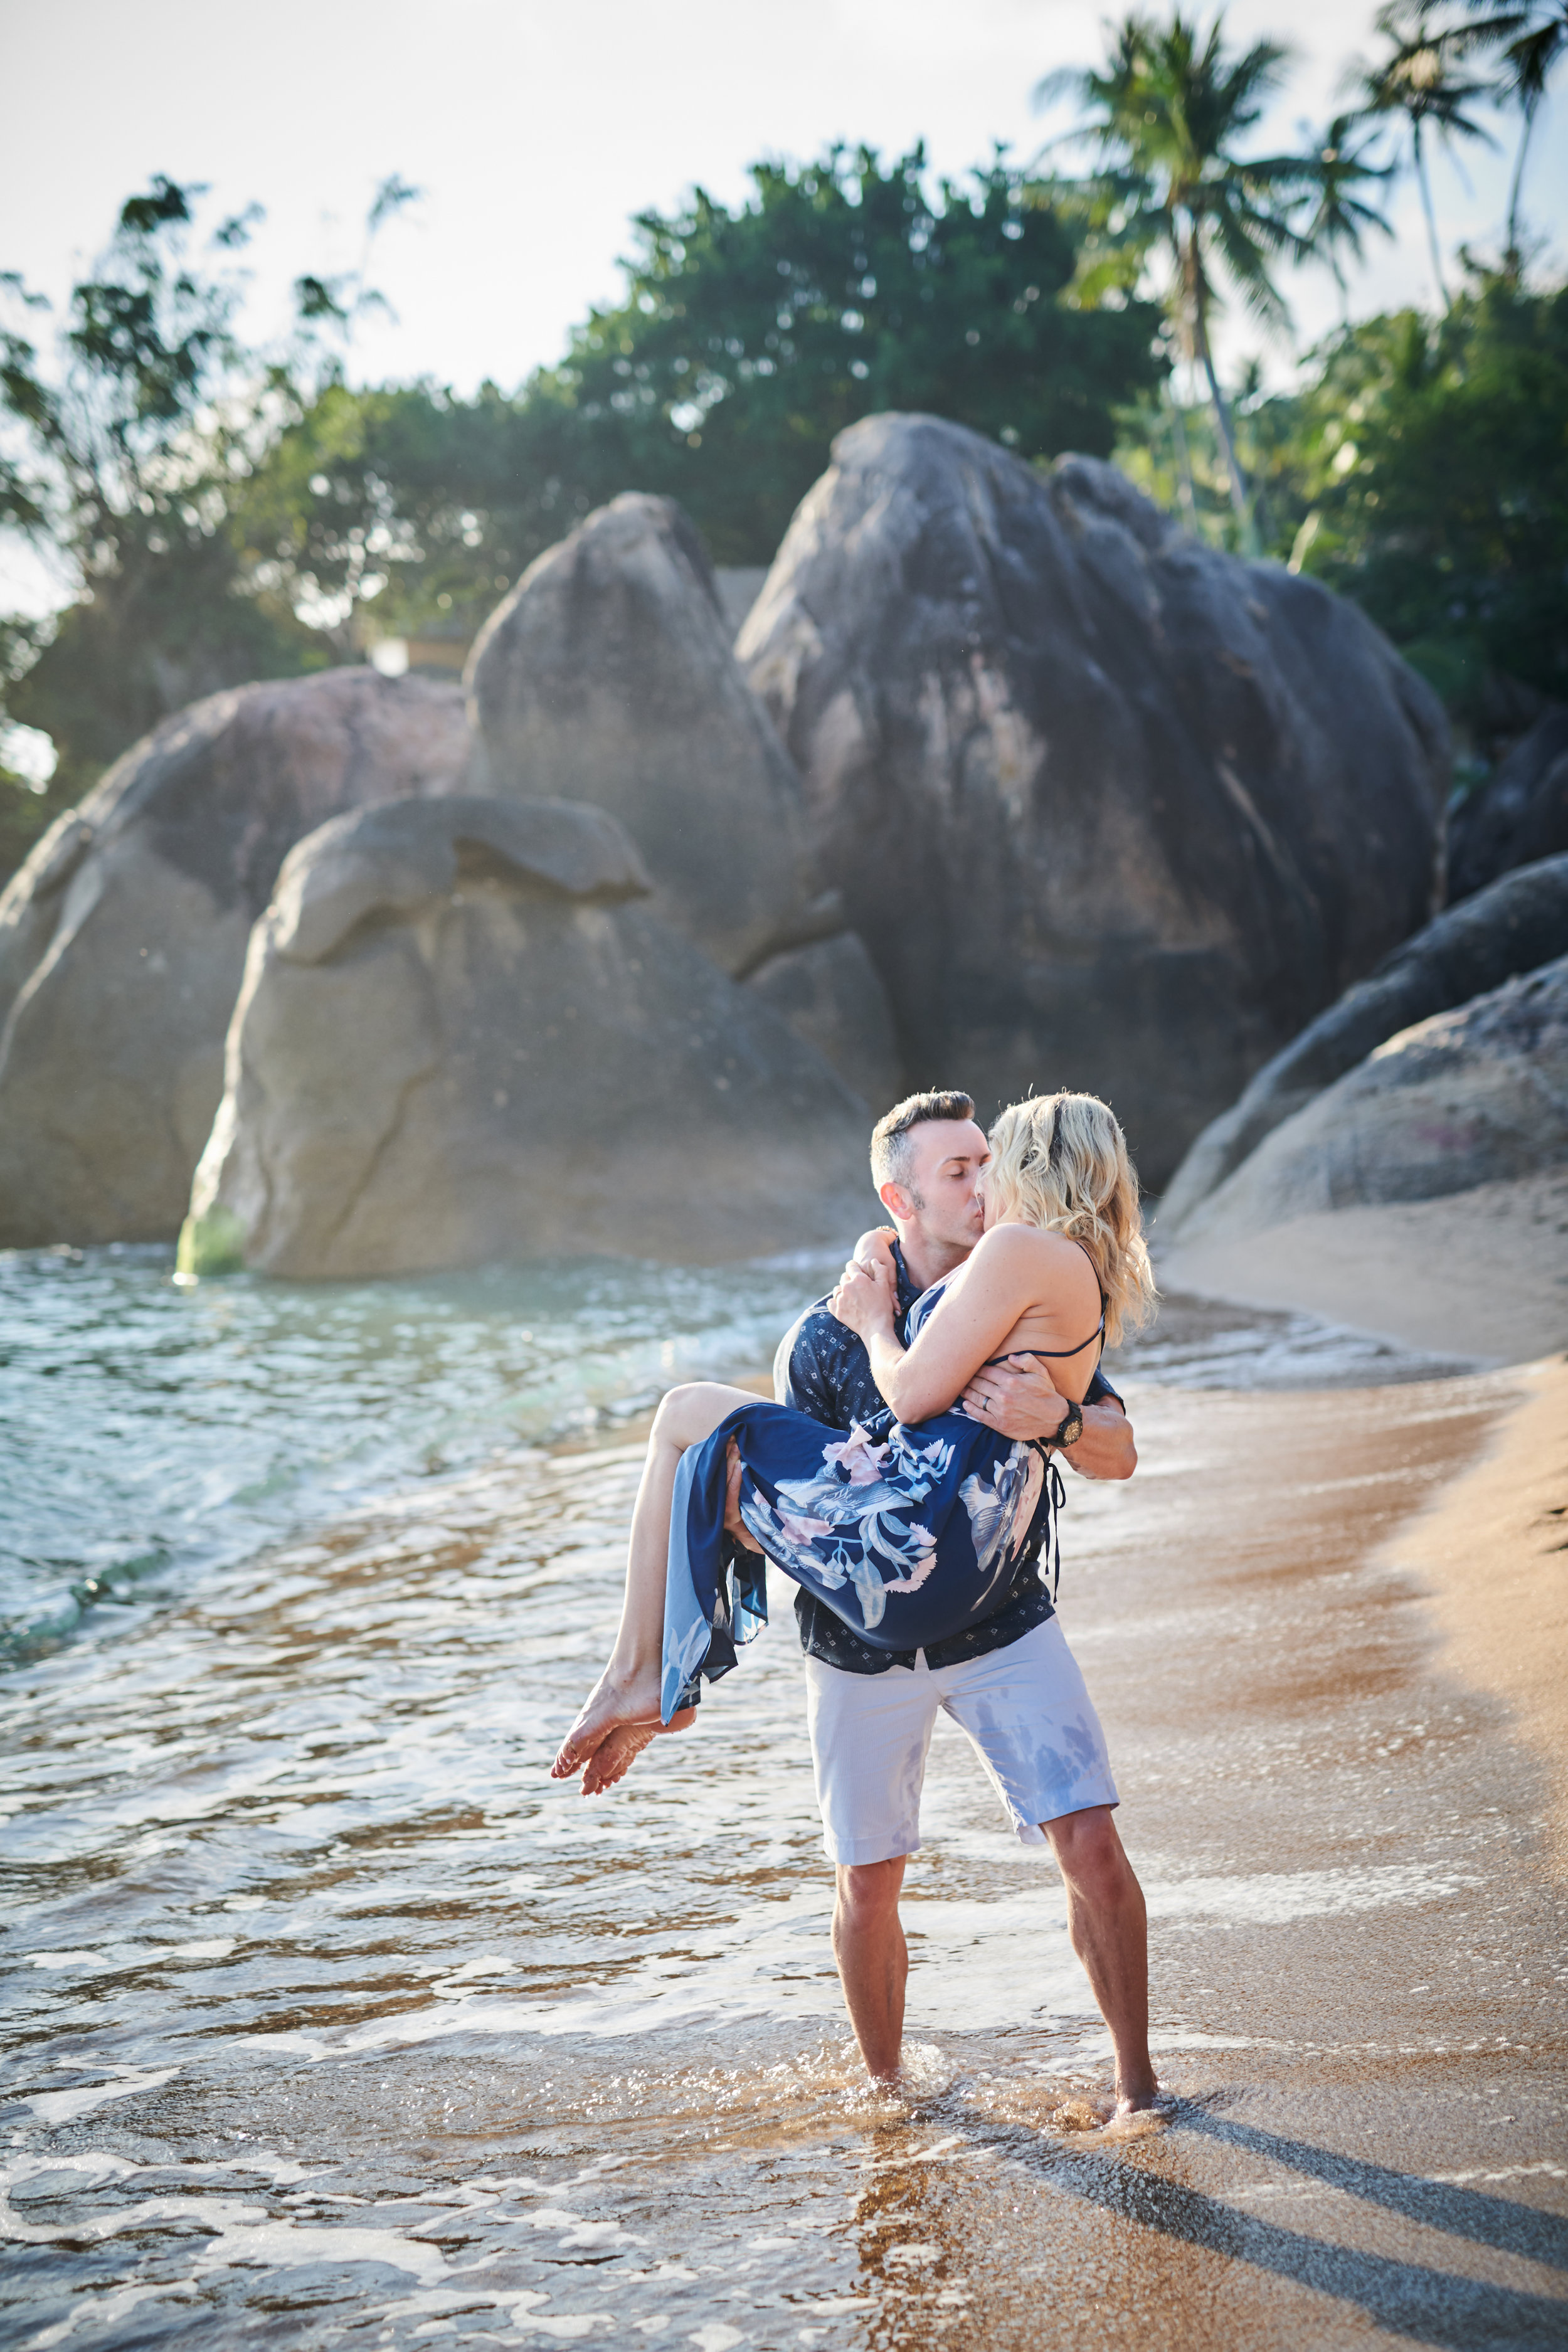 Our Flytographer photo session during our honeymoon in Thailand. Here is my Flytographer review plus a Flytographer discount code.